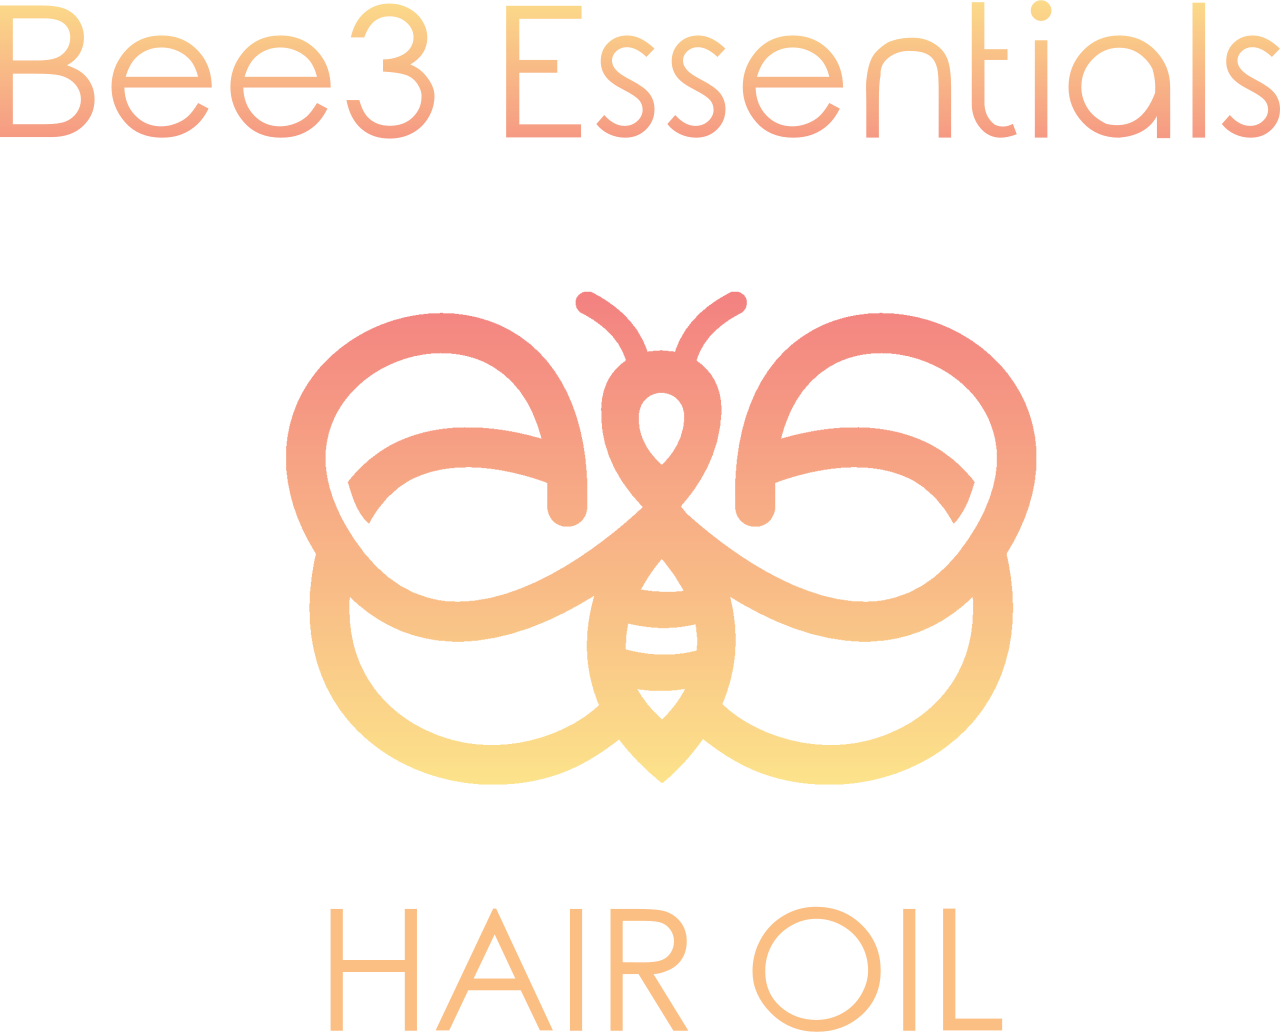 Bee3 Essentials 's web page